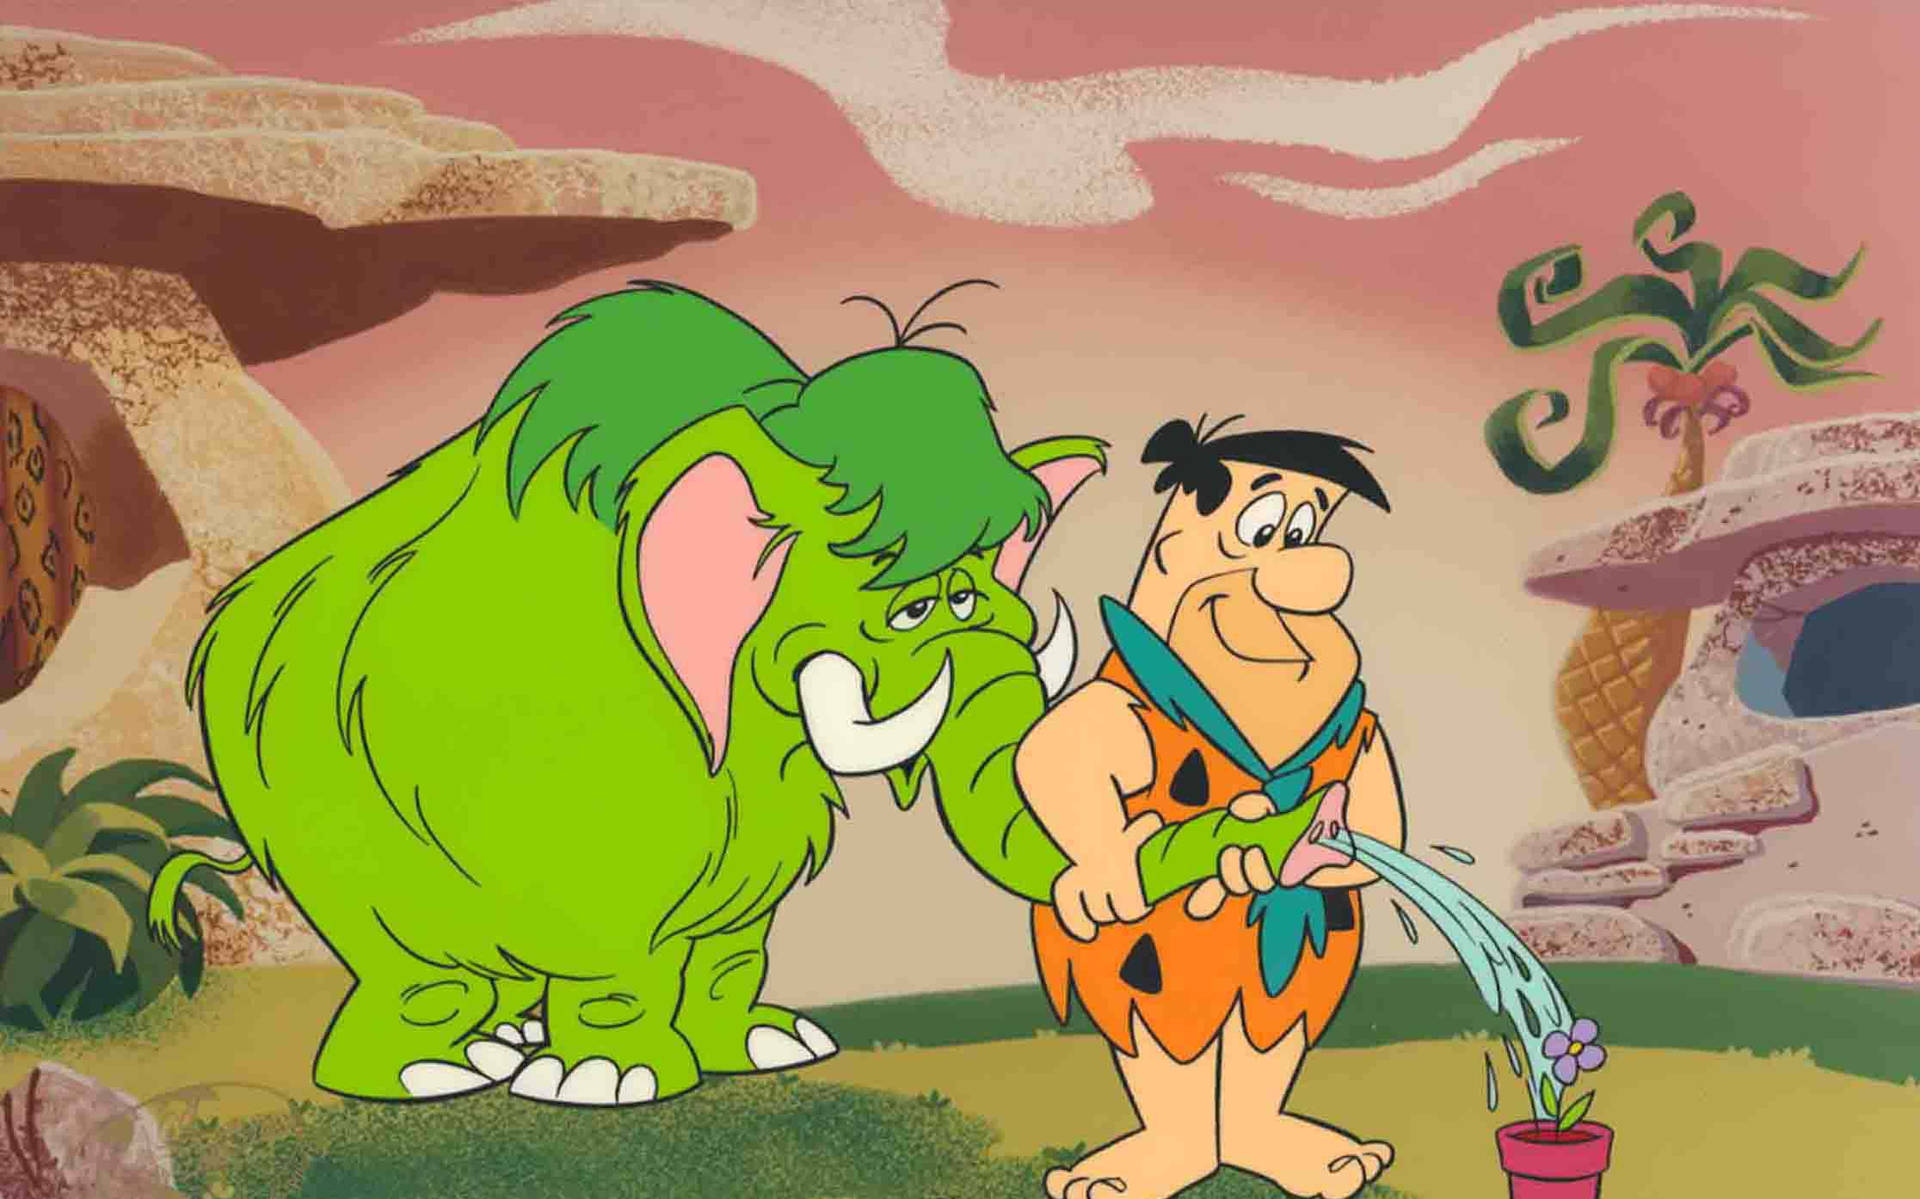 Fredflintstone Mammoth Hose (this Sentence Doesn't Make Sense In English, Please Provide A Context To Translate It Accurately) Wallpaper